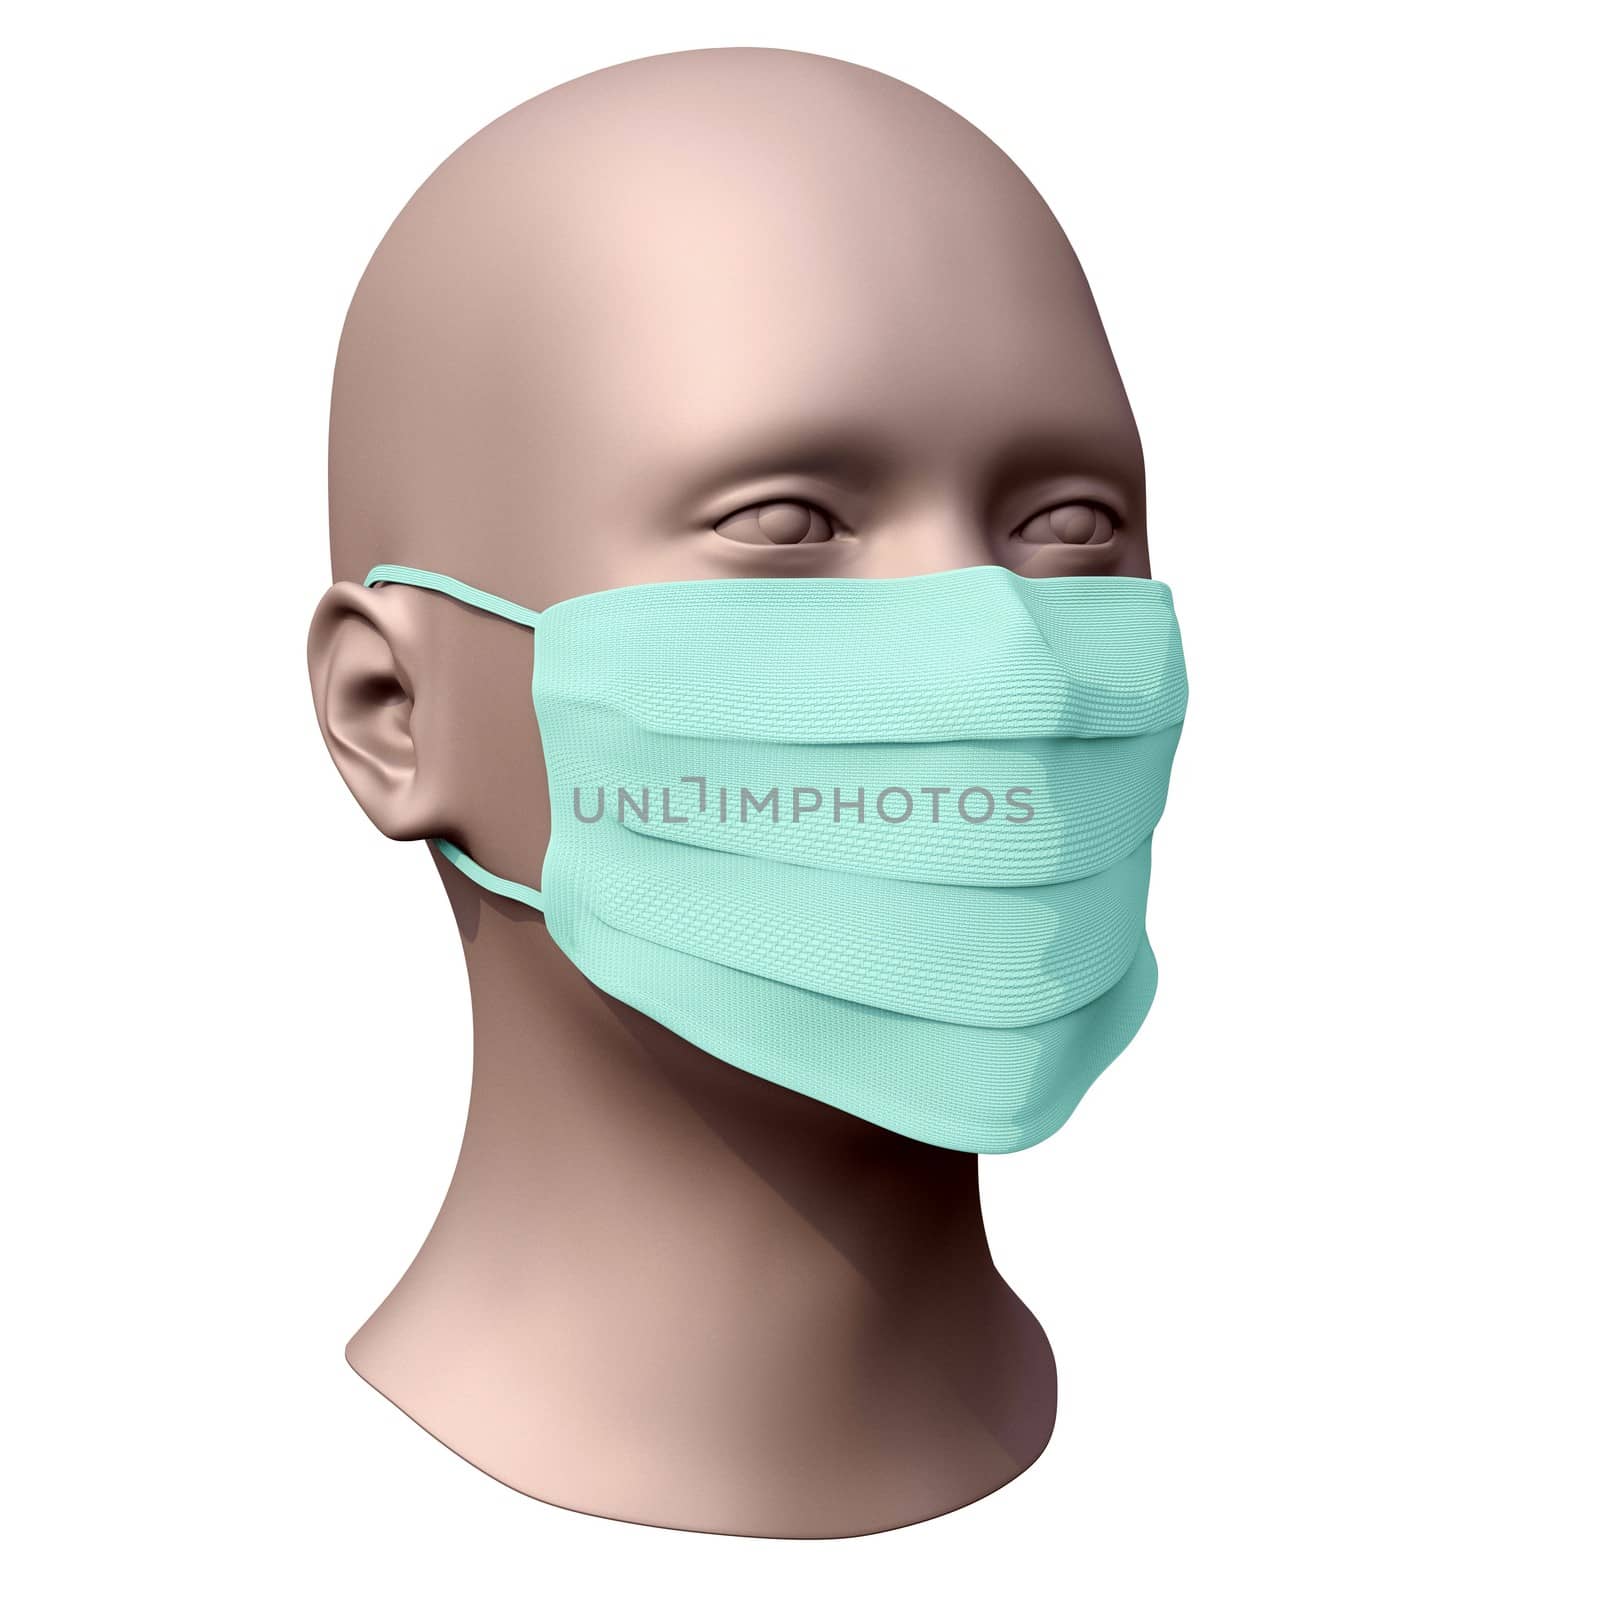 Breathing mask on face flat by dengess